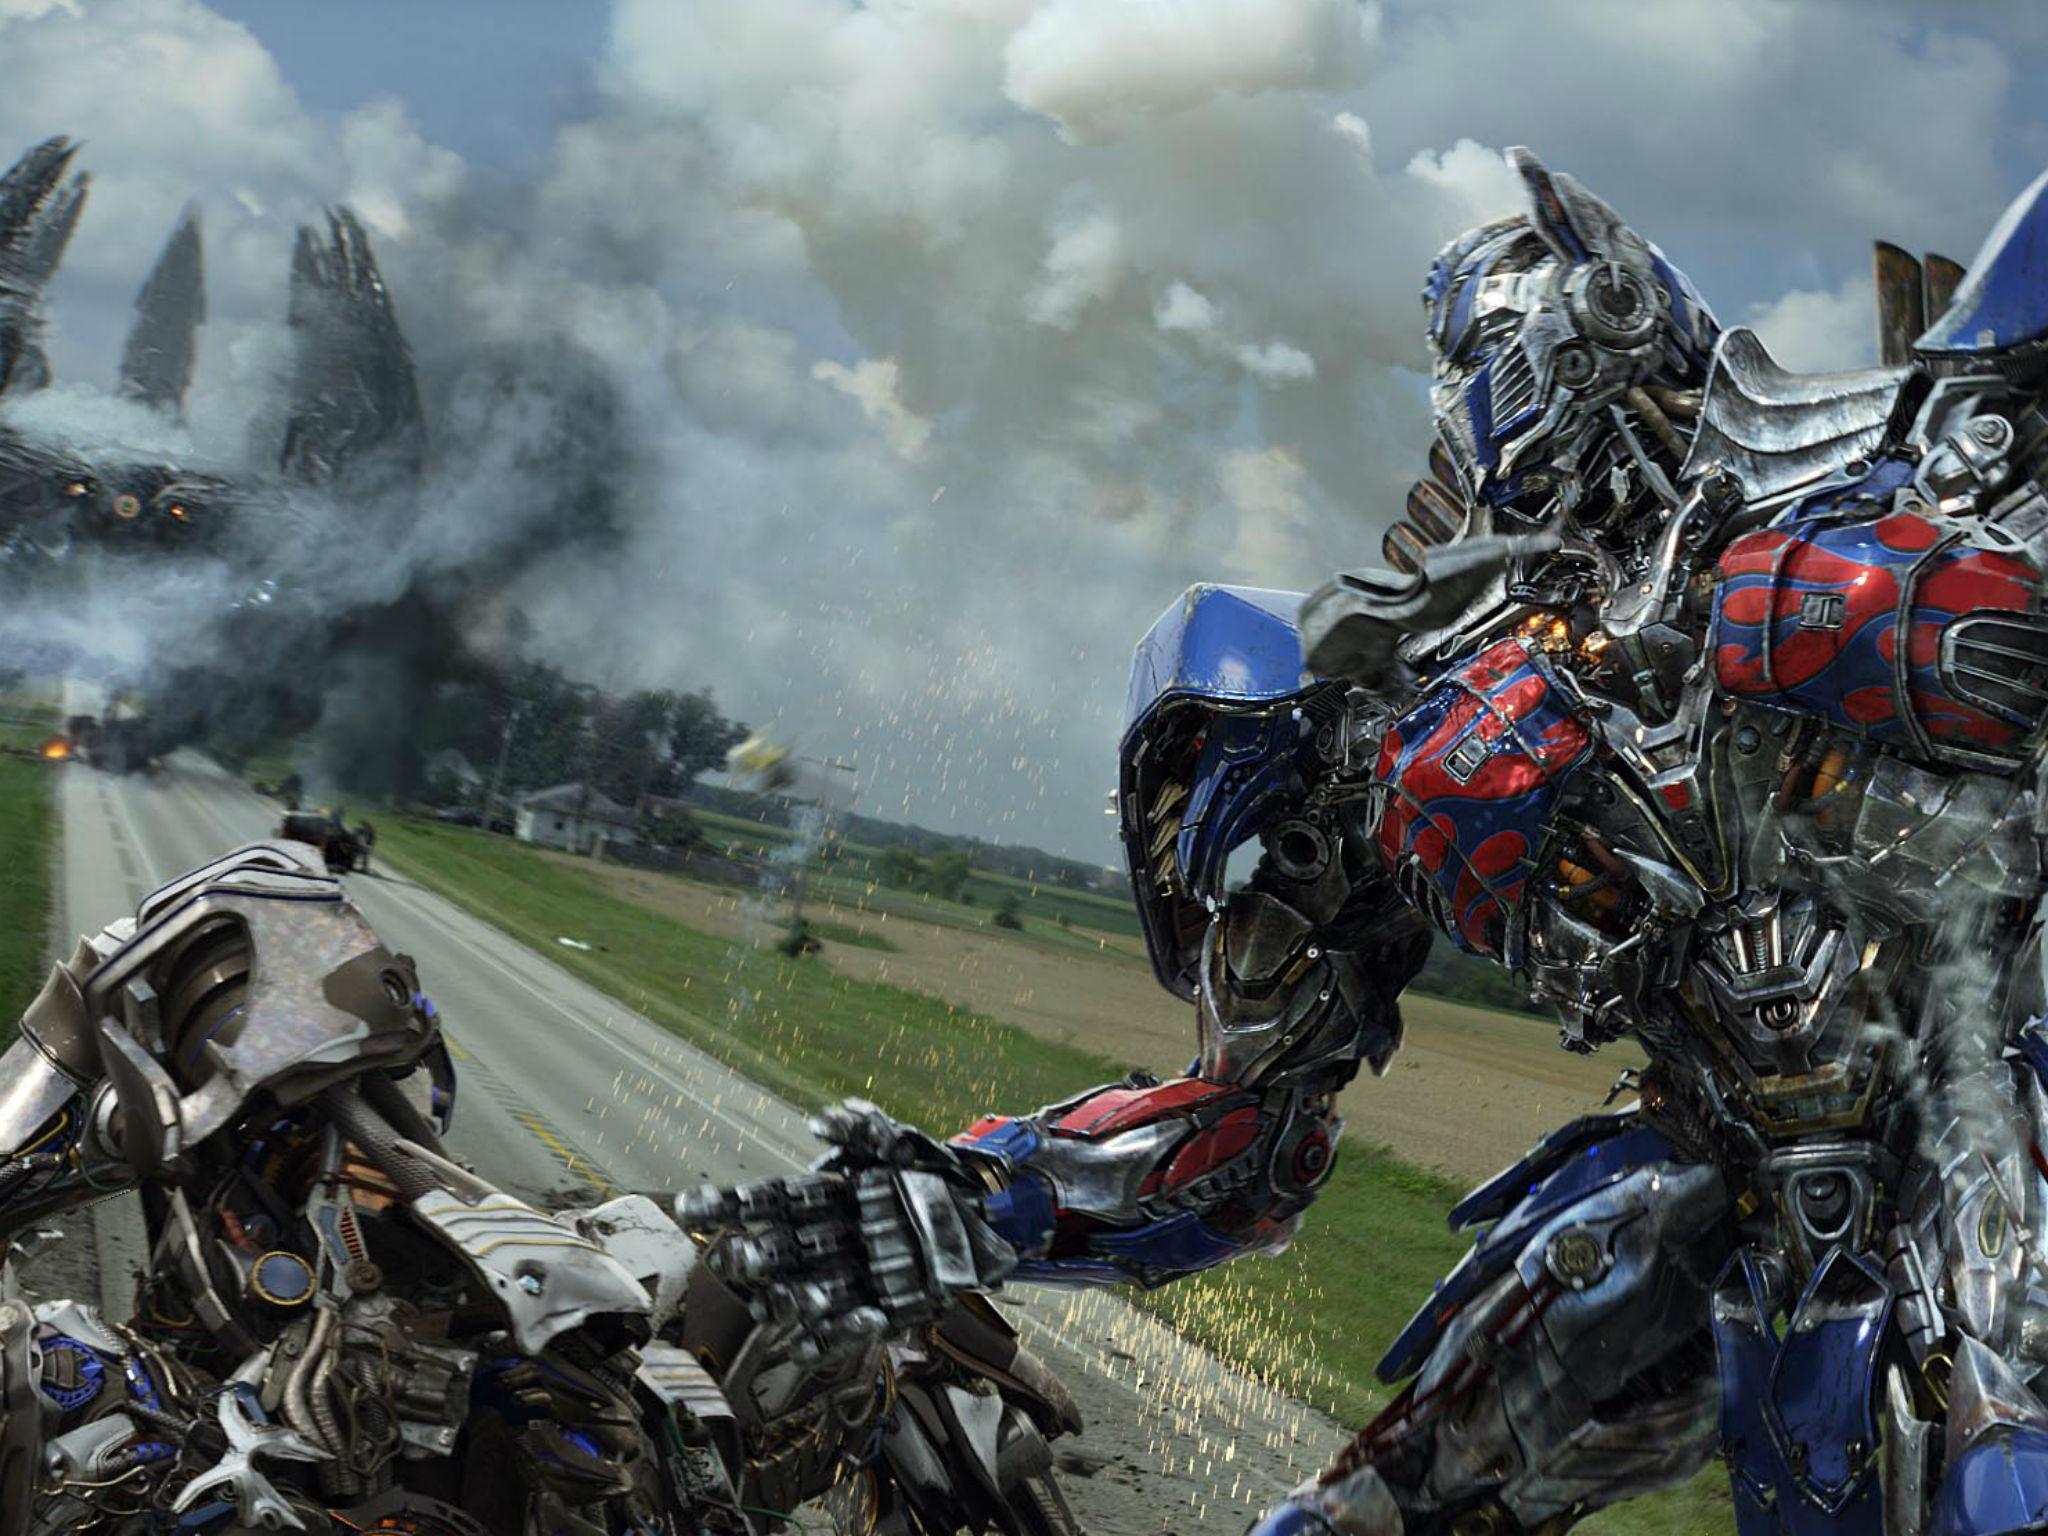 Transformers 6 release date cancelled by Paramount leaving fate of franchise unknown